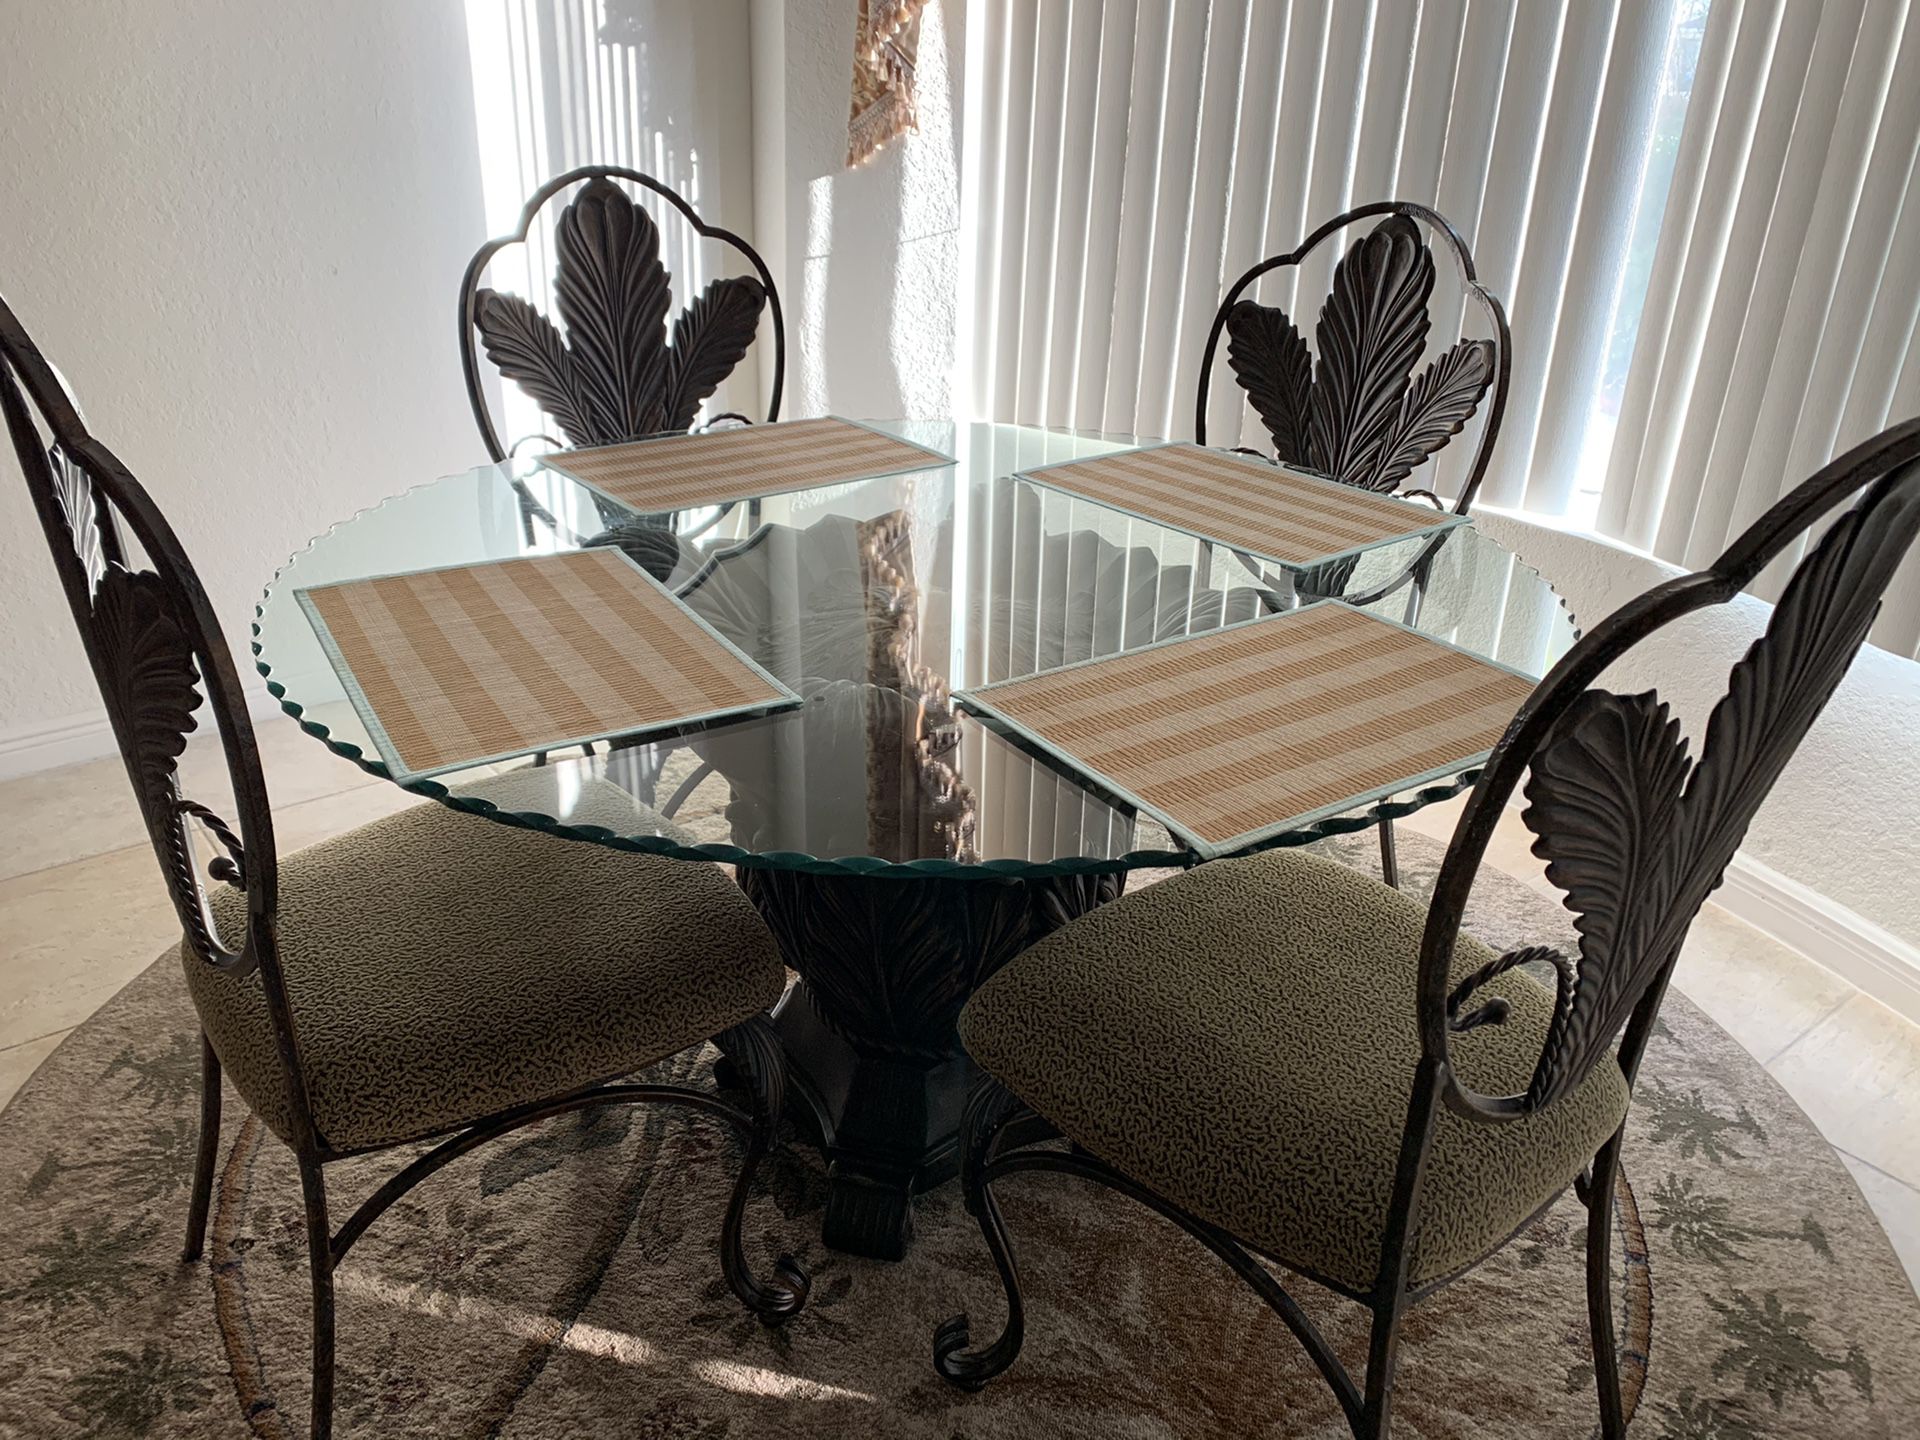 Eating kitchen dining glass table with 4 chairs